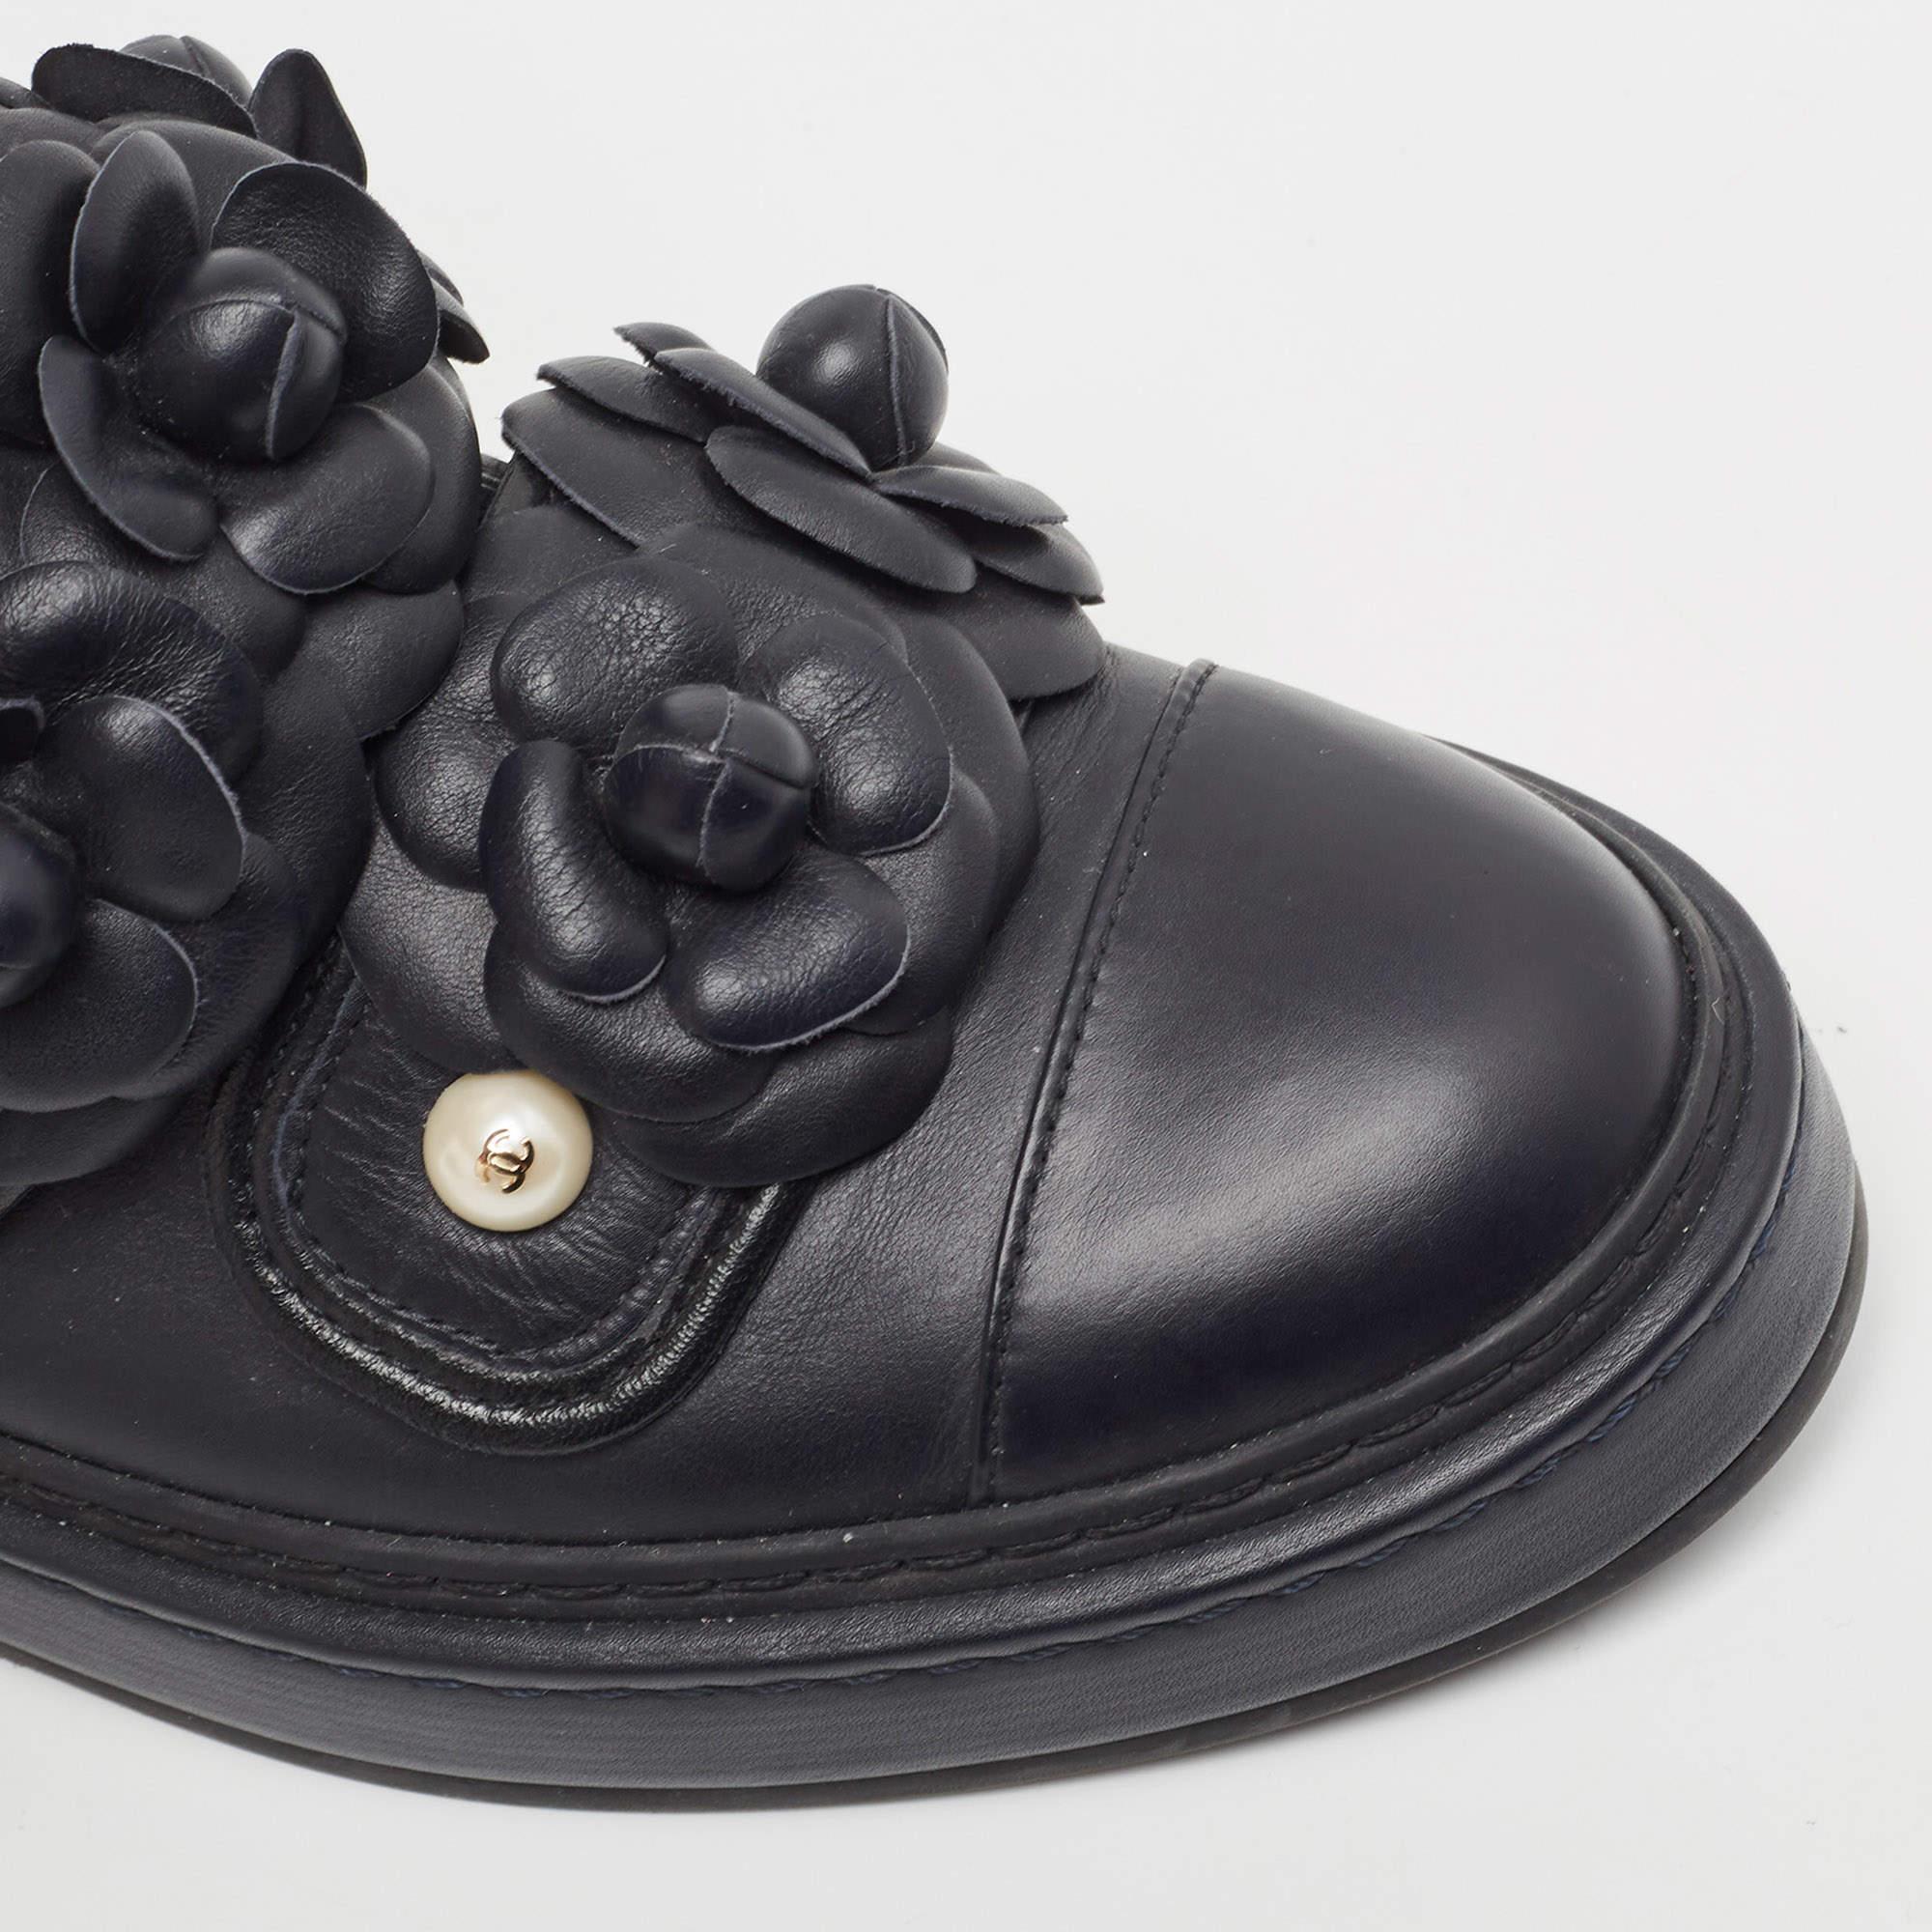 Chanel Black Leather Camellia Flowers Embellished High Top Sneakers Size 36.5 For Sale 2